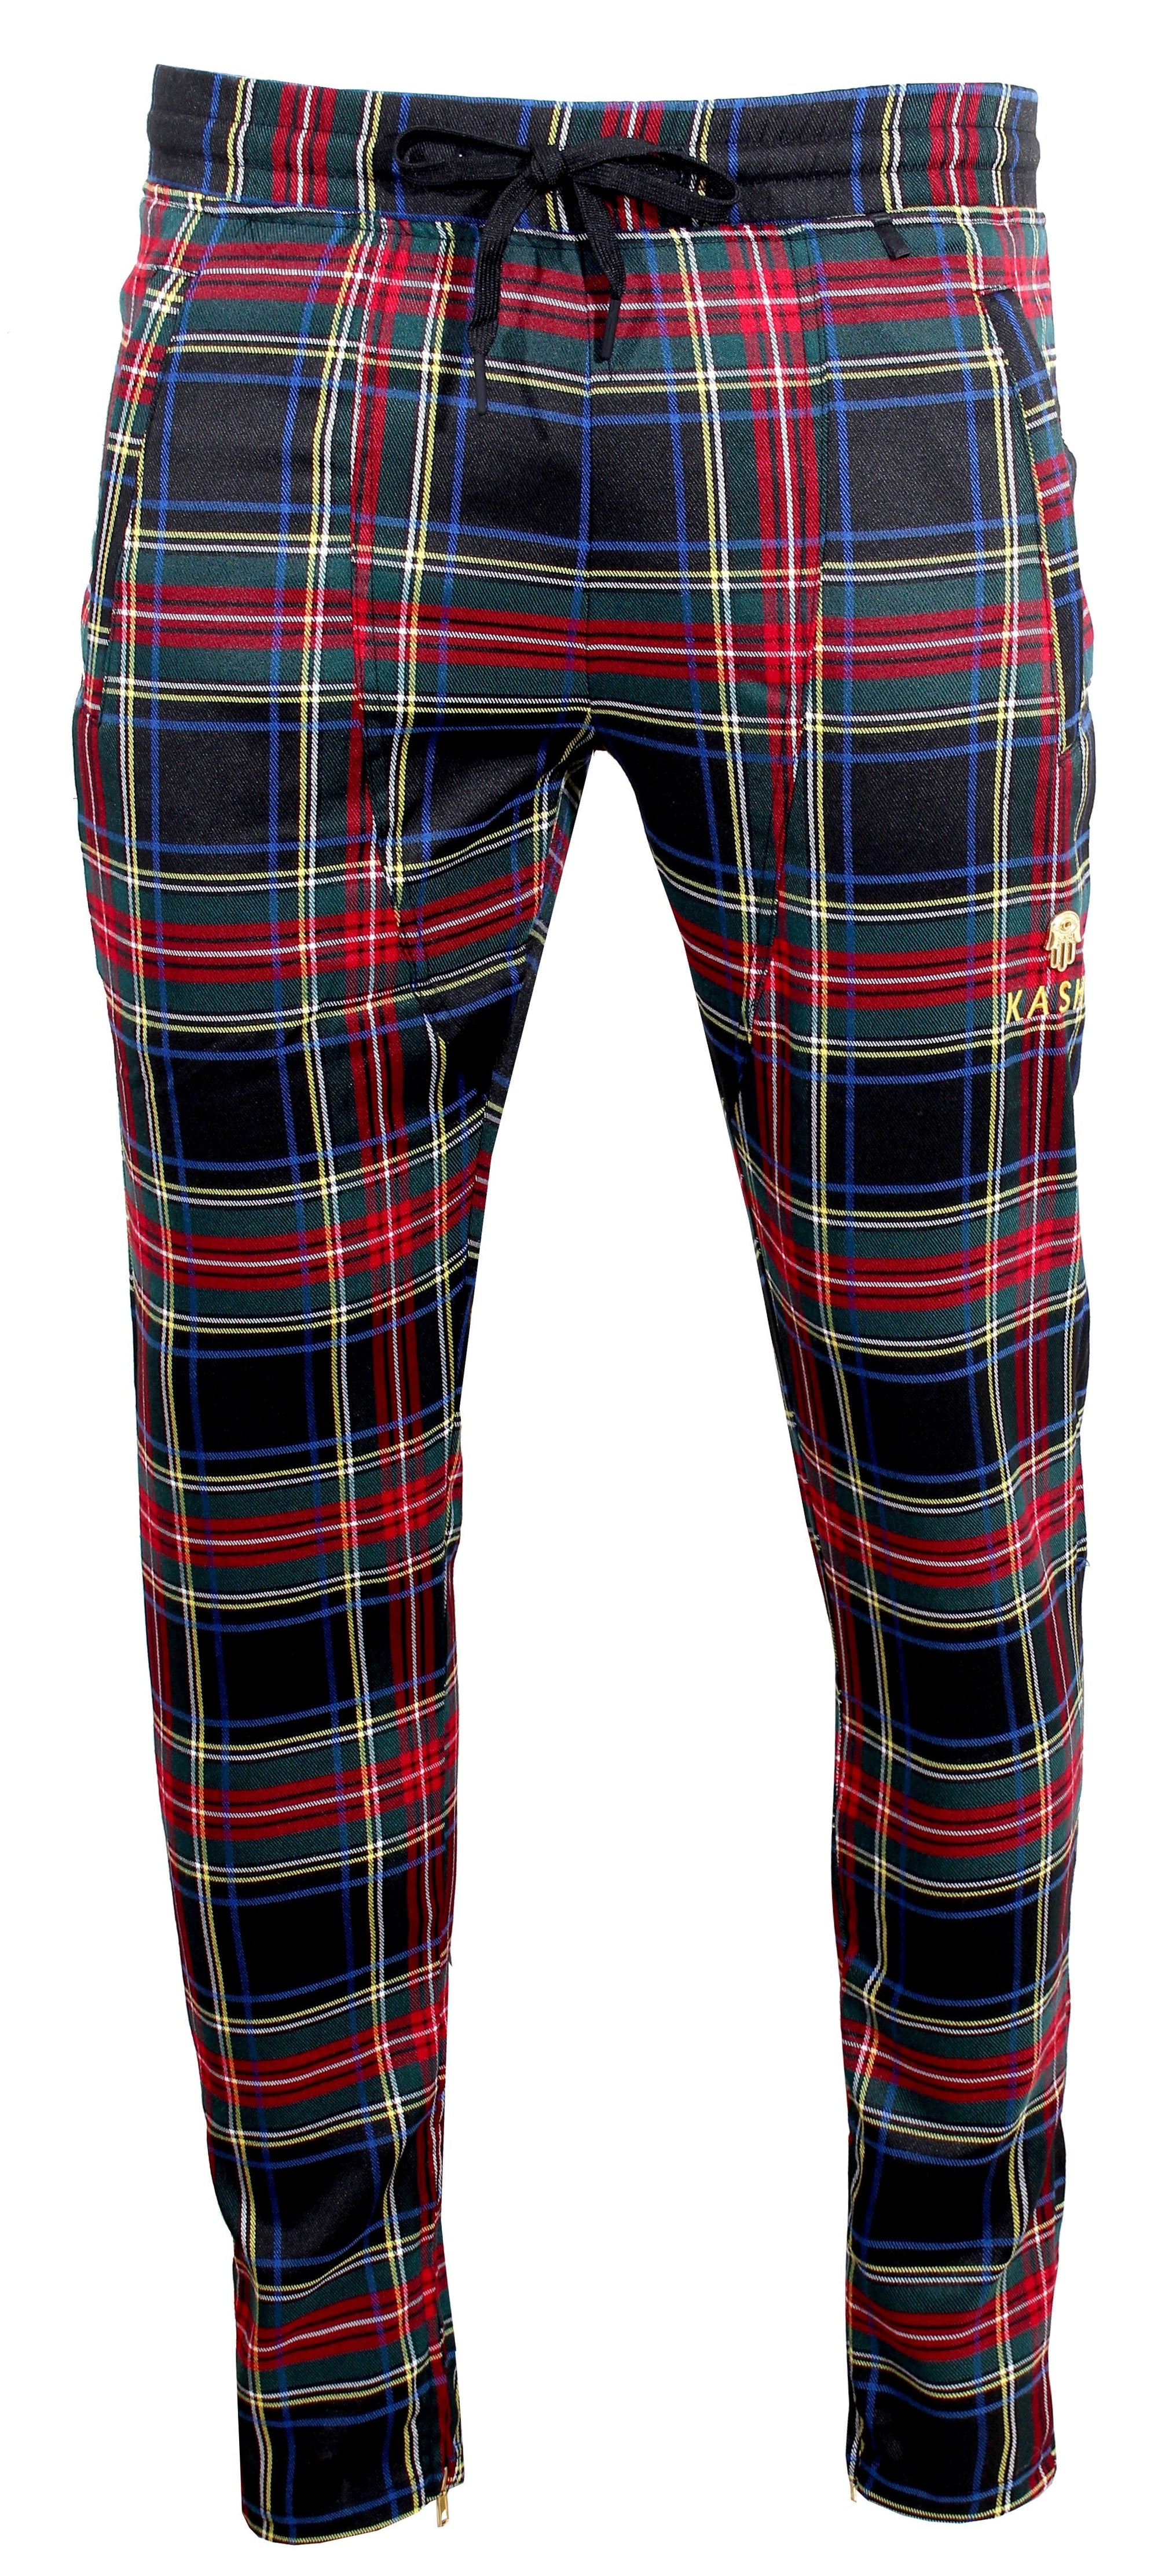 Multi Color Plaid Track Pants with Embroidered 'KASH' on Thigh